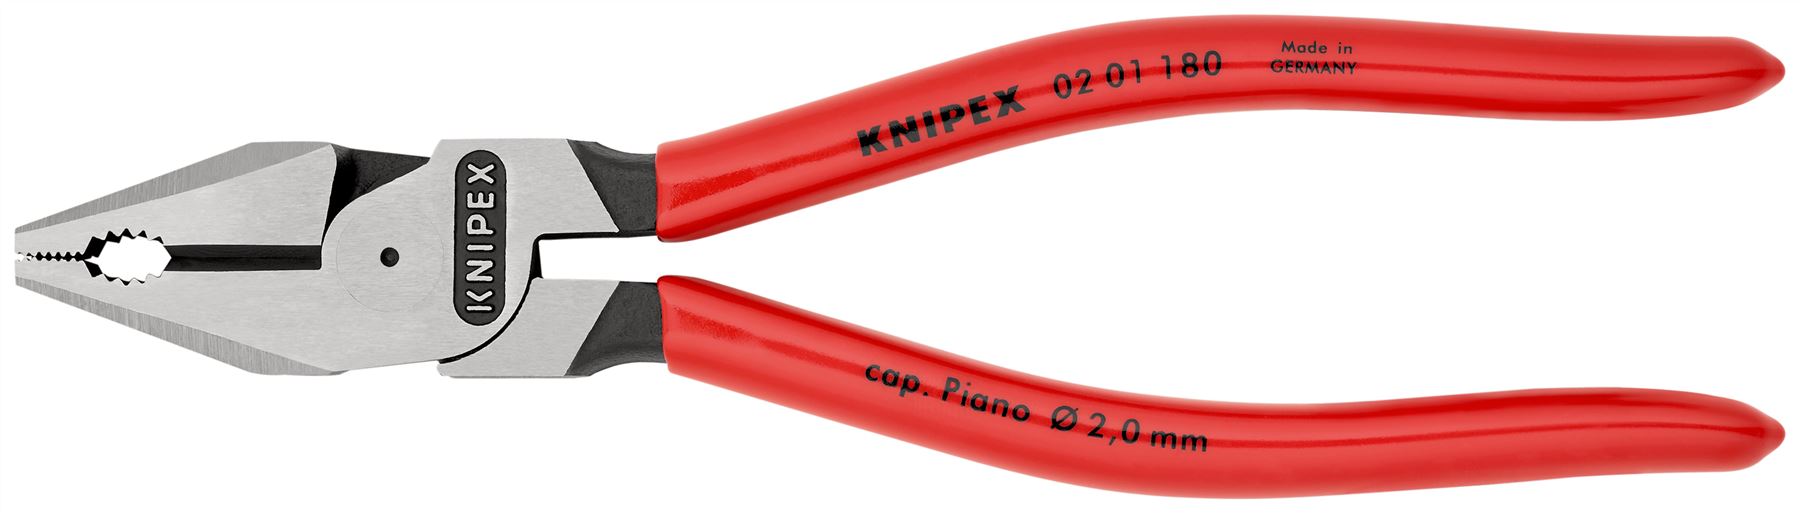 KNIPEX Combination Pliers High Leverage 180mm Plastic Coated 02 01 180